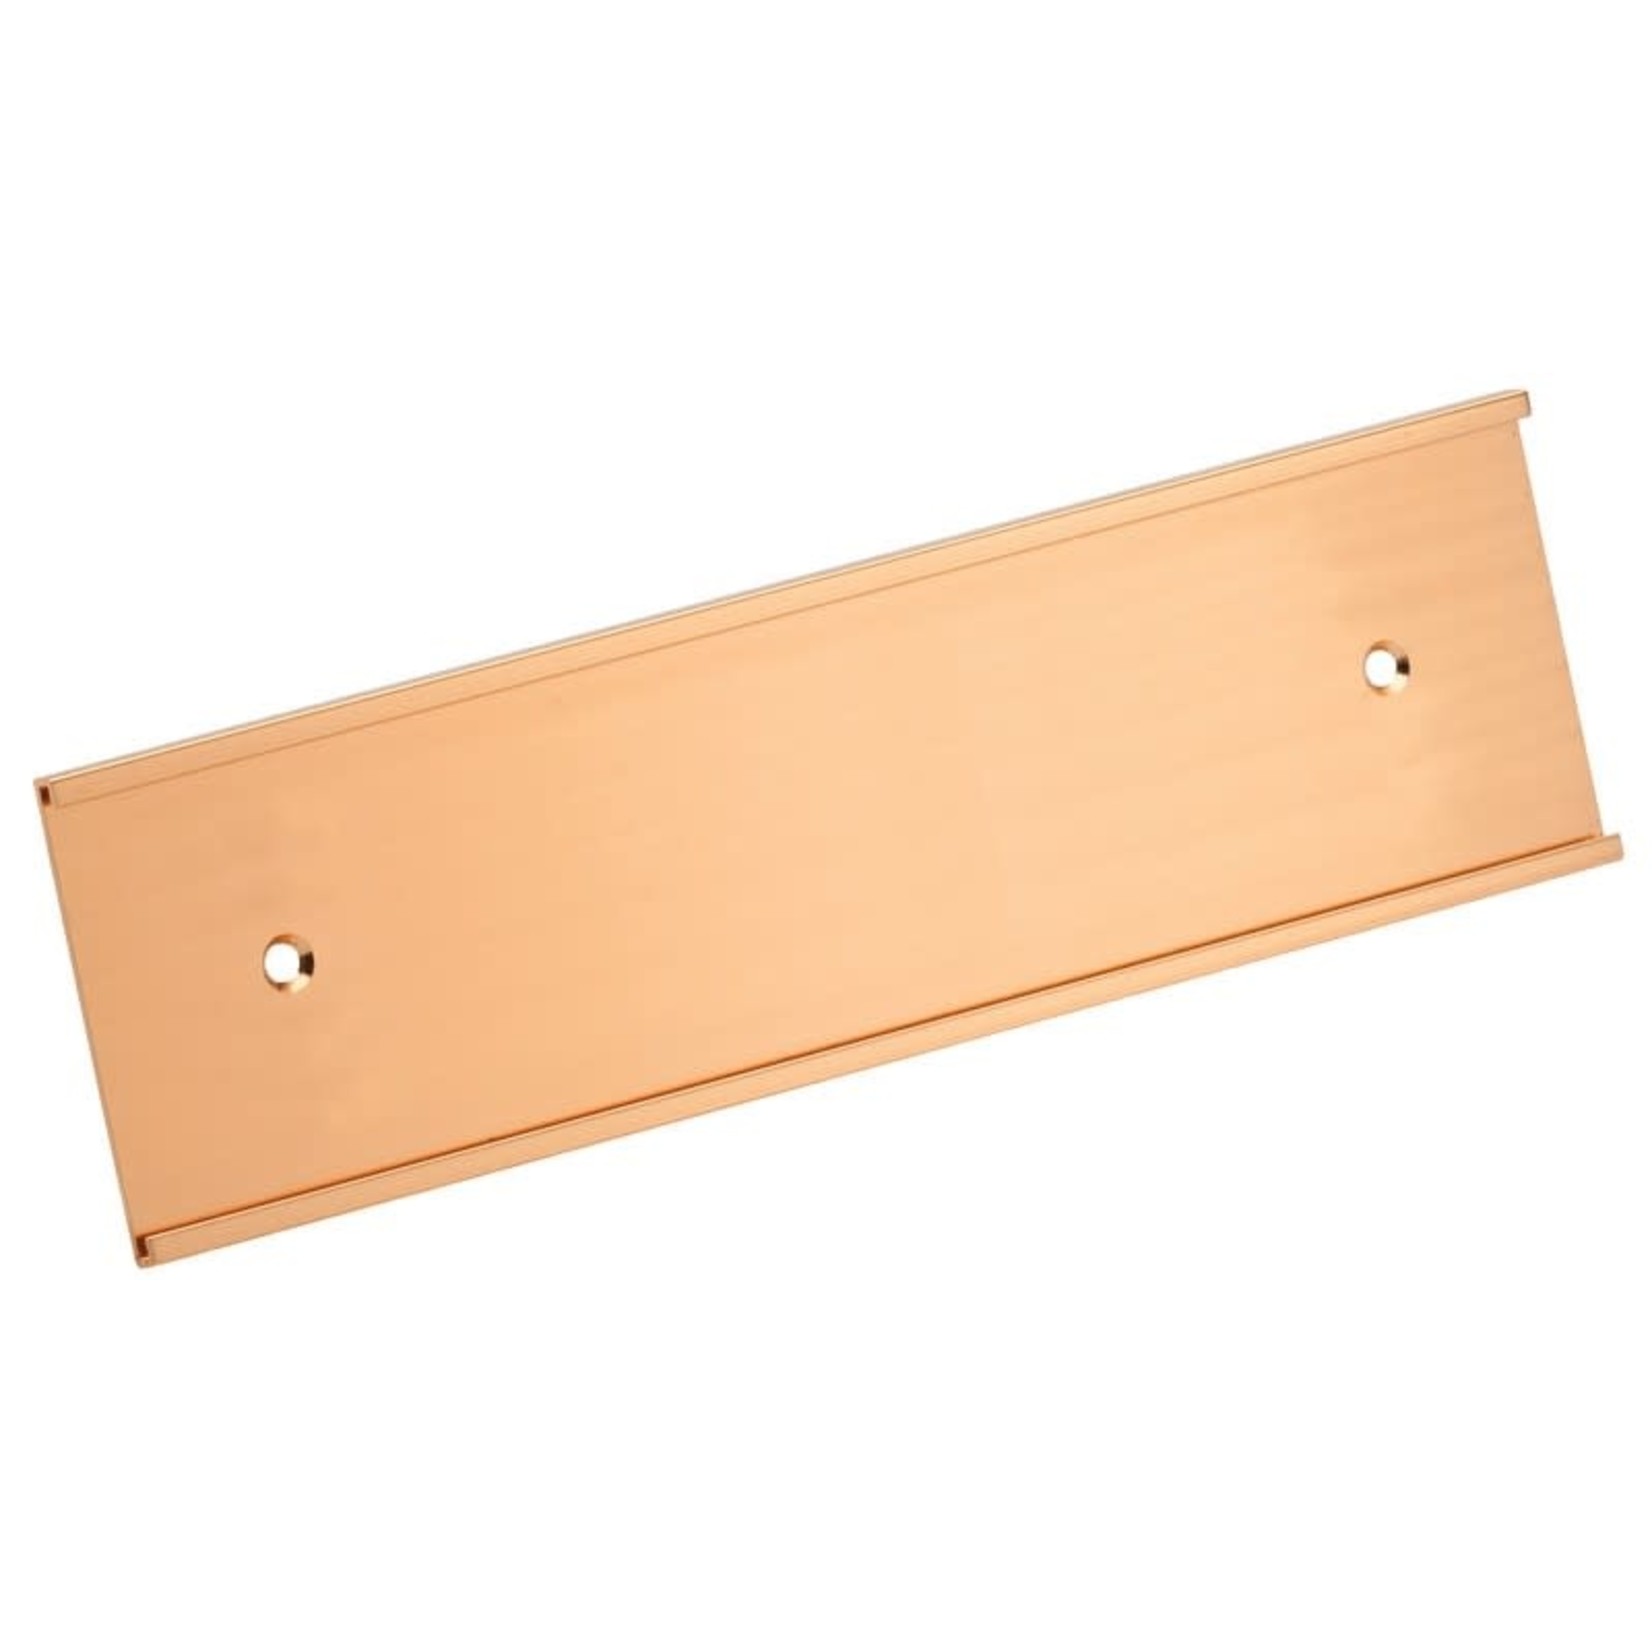 Marco 2x10 Wall Holder gold, Rose Gold, Silver, or Black